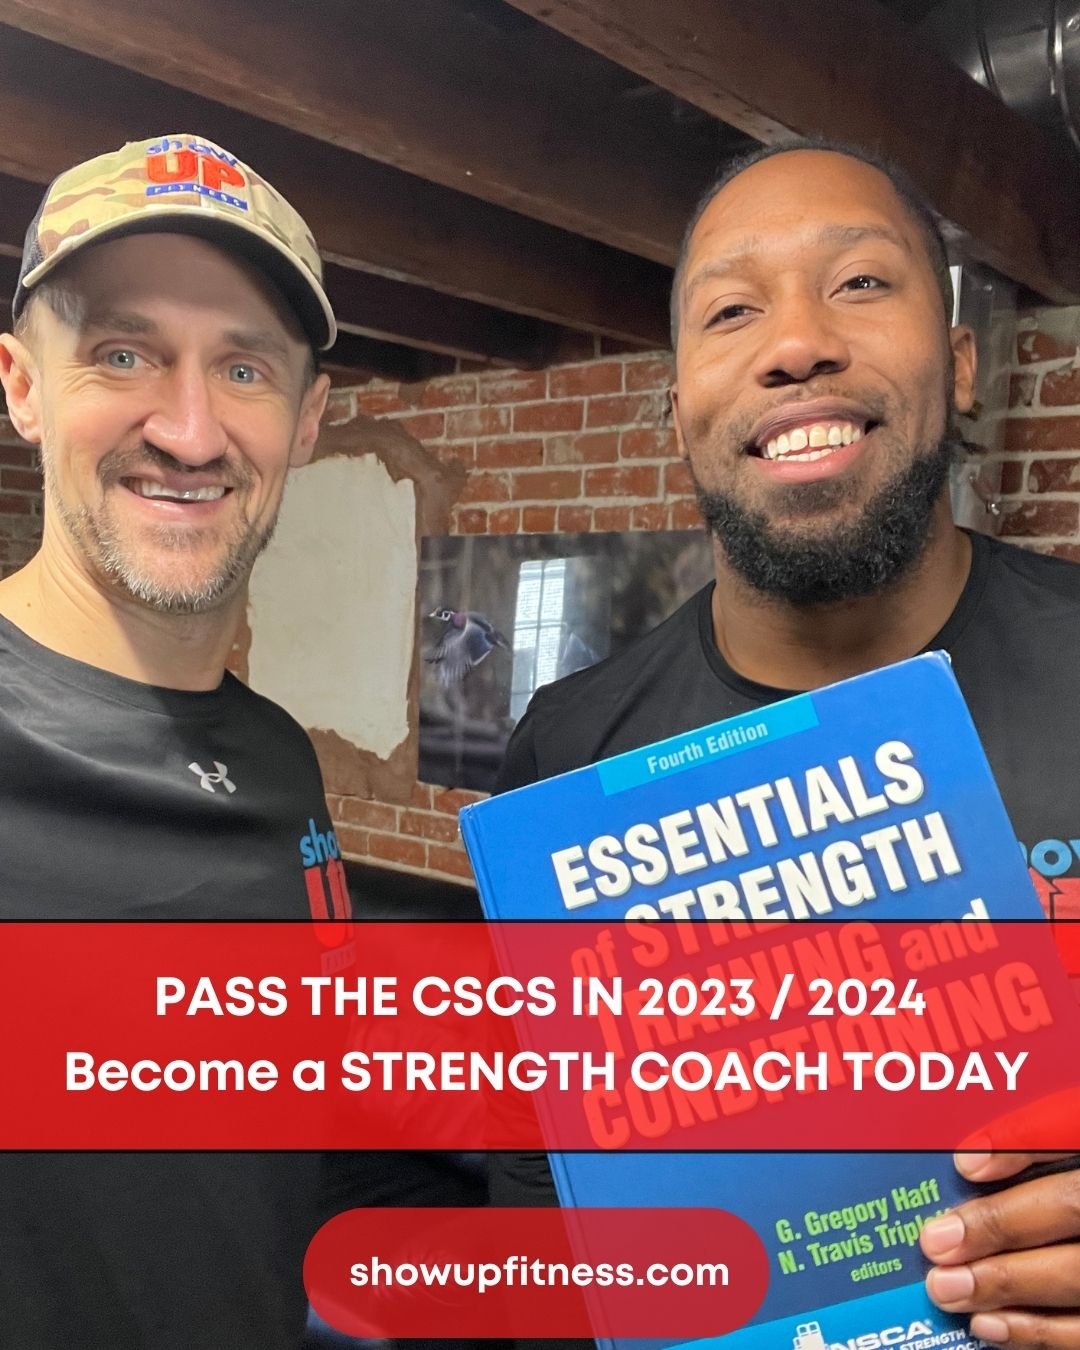 How to become a strength coach &amp; pass the CSCS in 2023 / 24